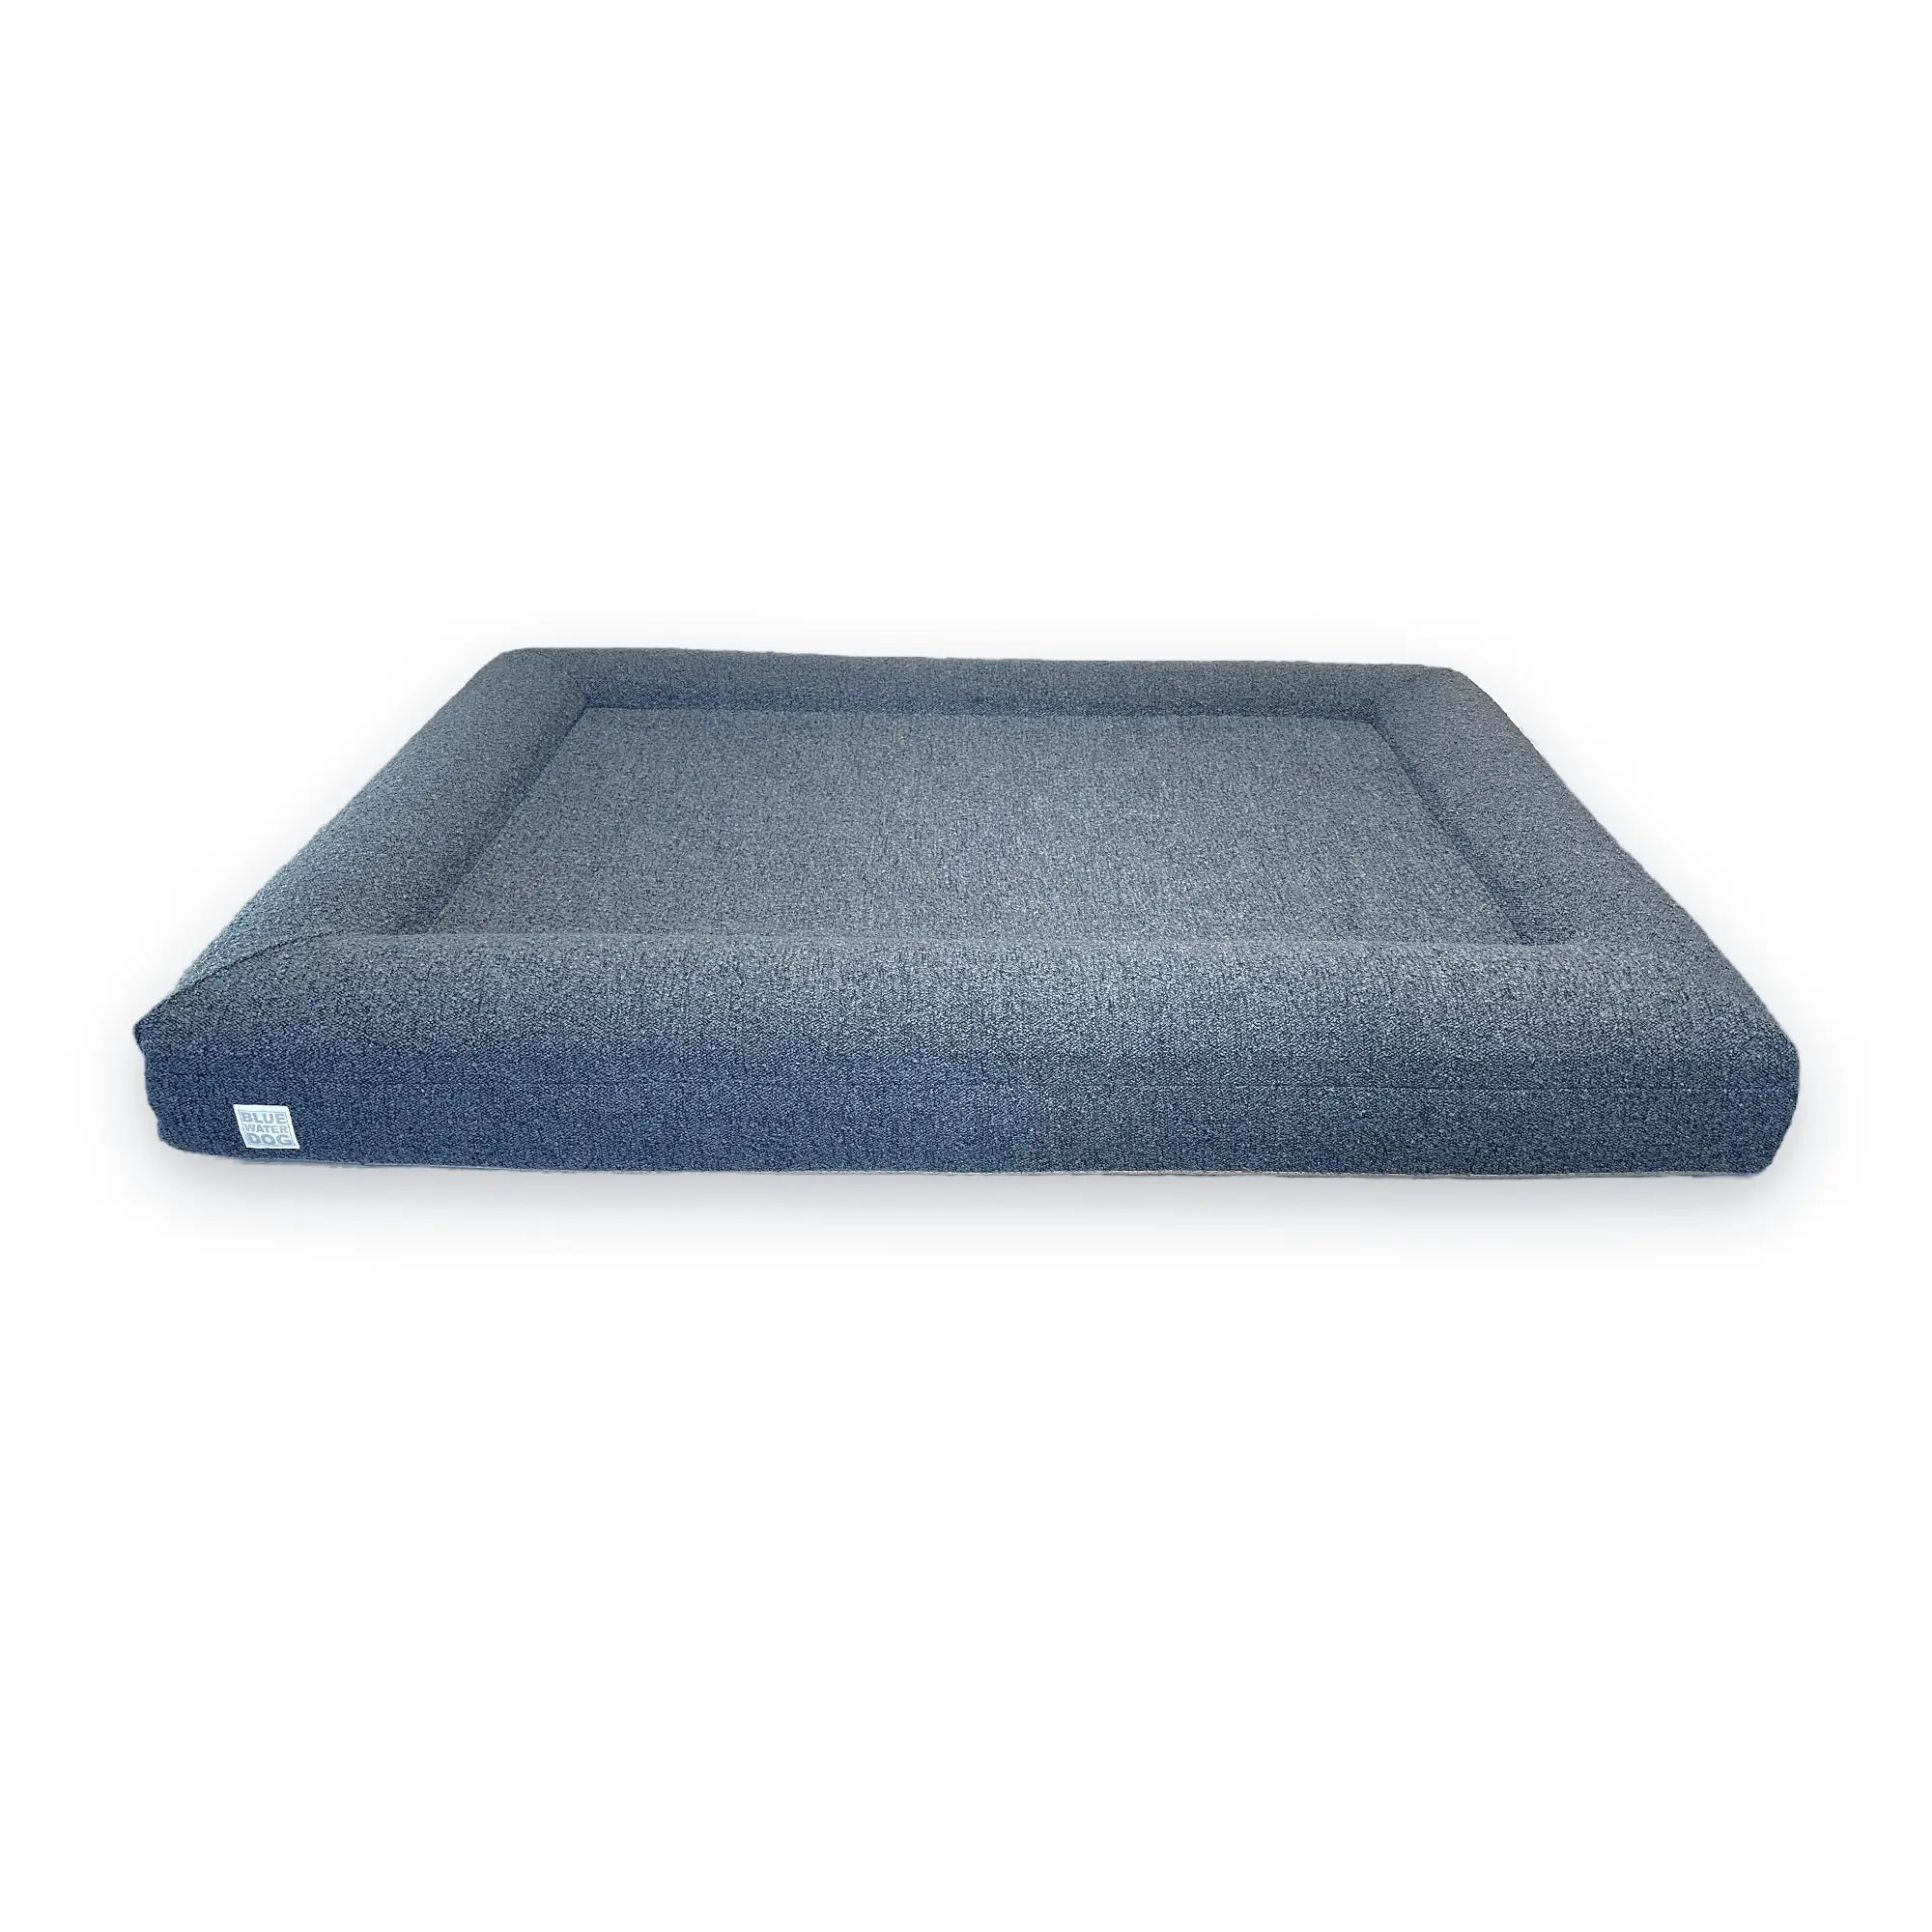 Front of an extra large, blue-colored orthopedic memory foam rectangular boucle dog bed with bolsters.